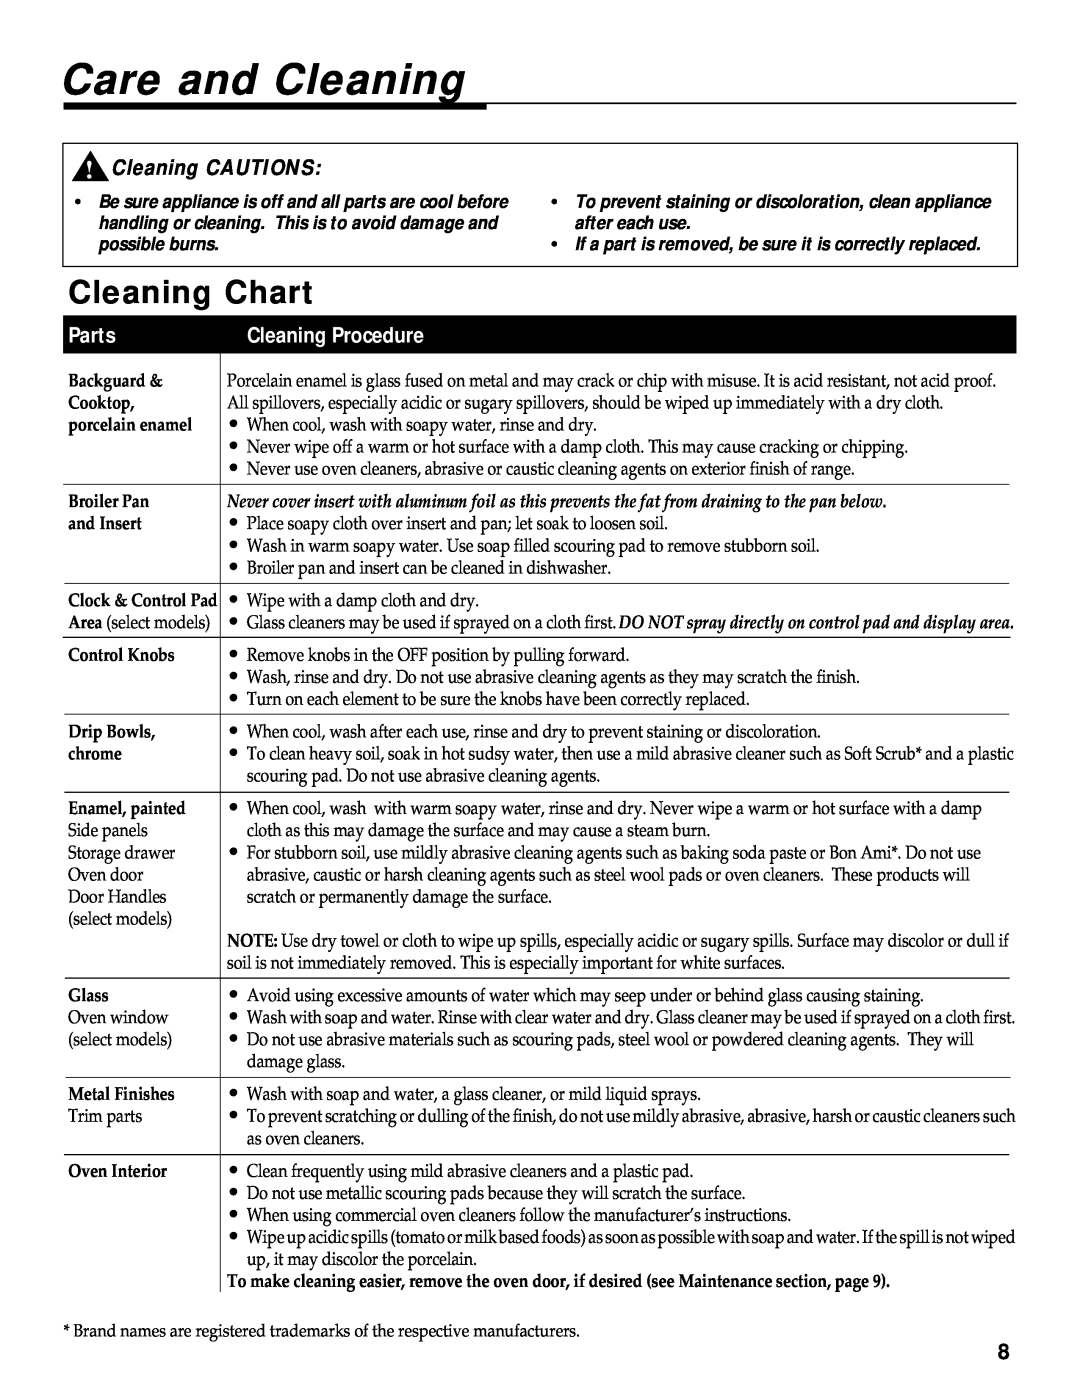 Maytag WT-TOD warranty Care and Cleaning, Cleaning Chart, Cleaning CAUTIONS, Parts, Cleaning Procedure 